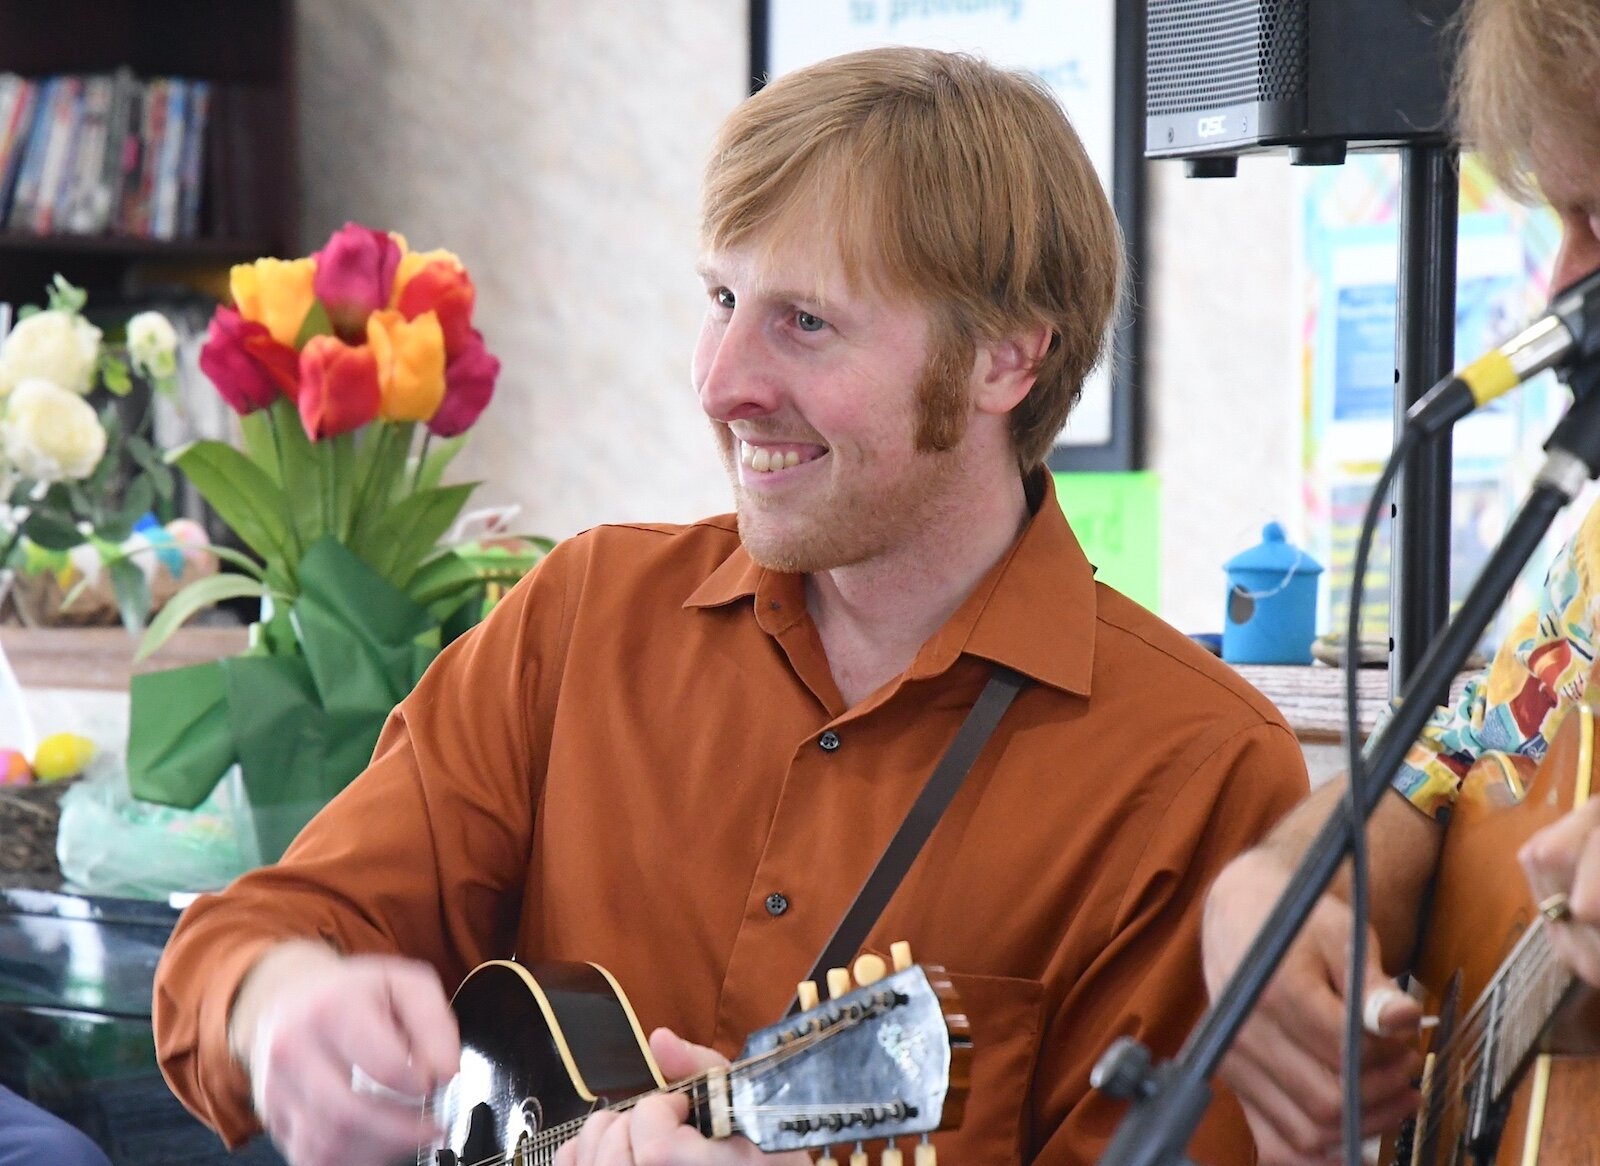 Luke Lenhart plays the mandolin for residents of Park Place Assisted Living in Kalamazoo.